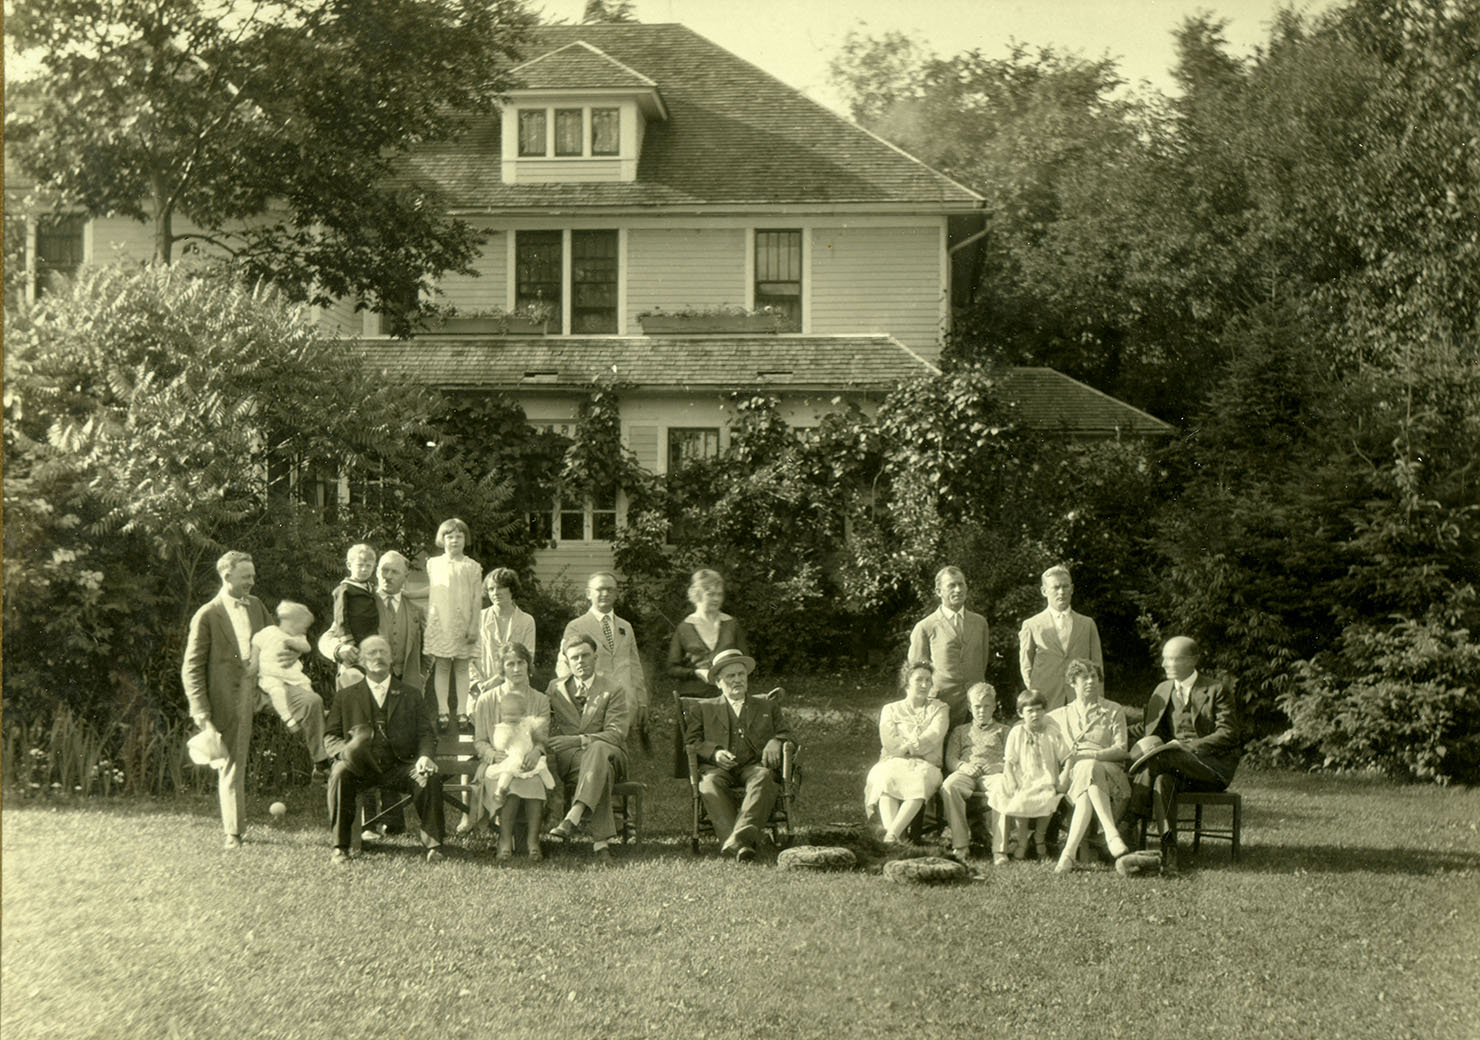 The Fromms posing in front of the family home, late 1930s. Photograph courtesy of the Marathon County Historical Society.